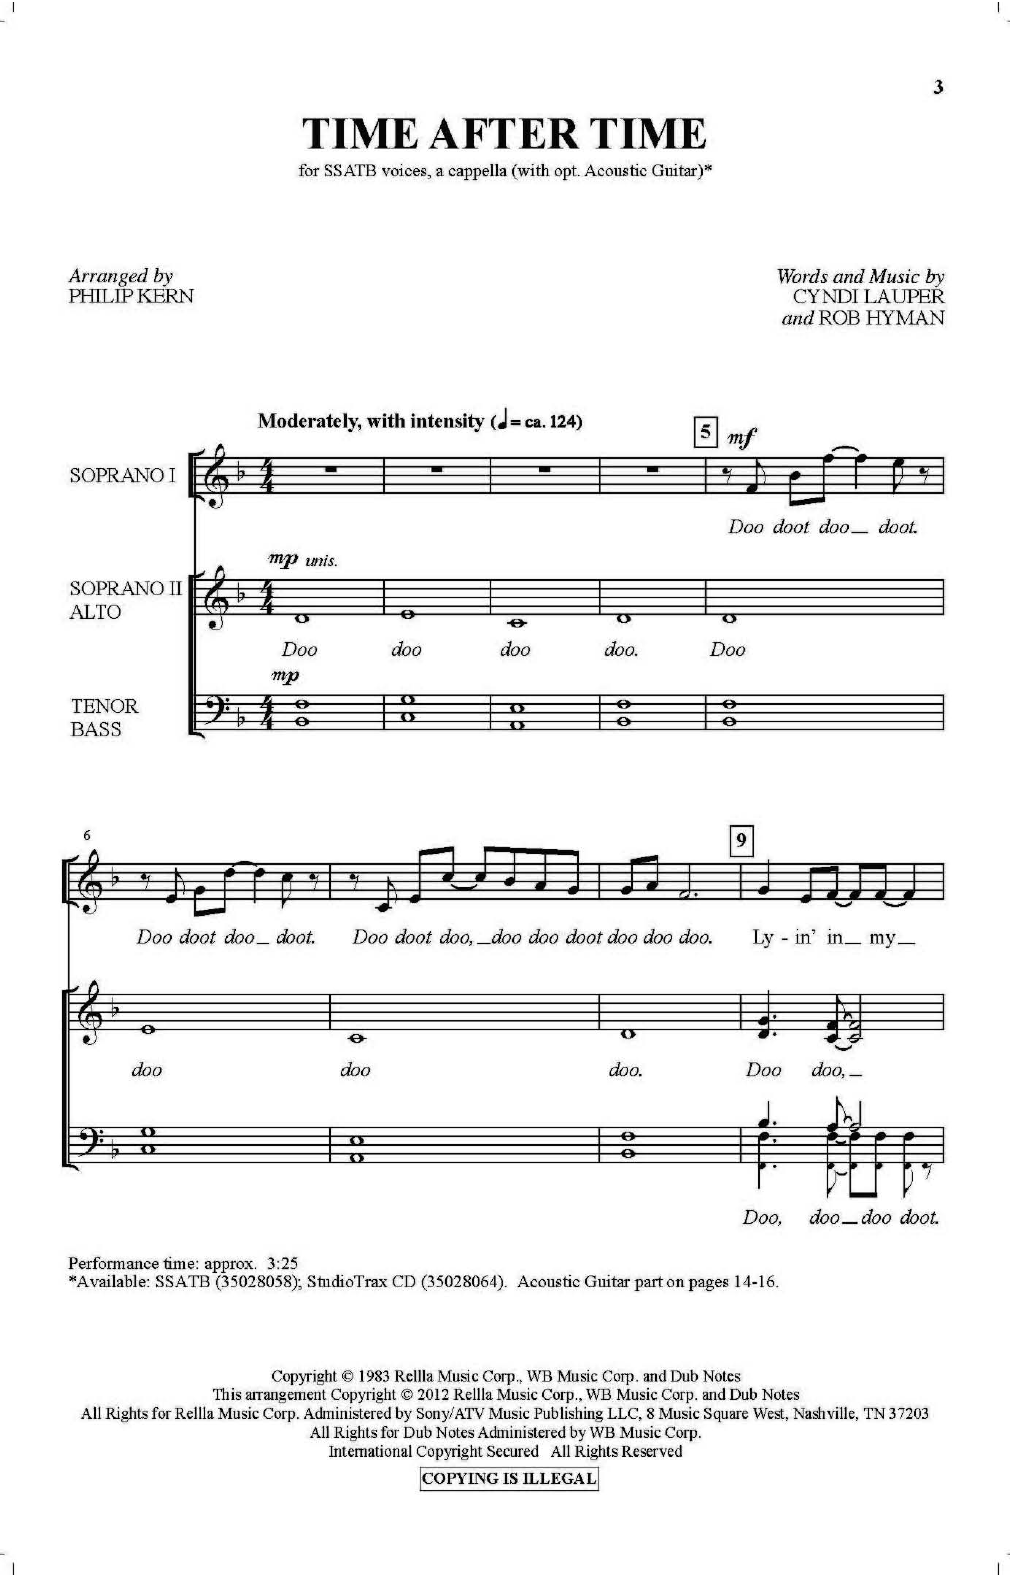 Download Cyndi Lauper Time After Time (arr. Philip Kern) Sheet Music